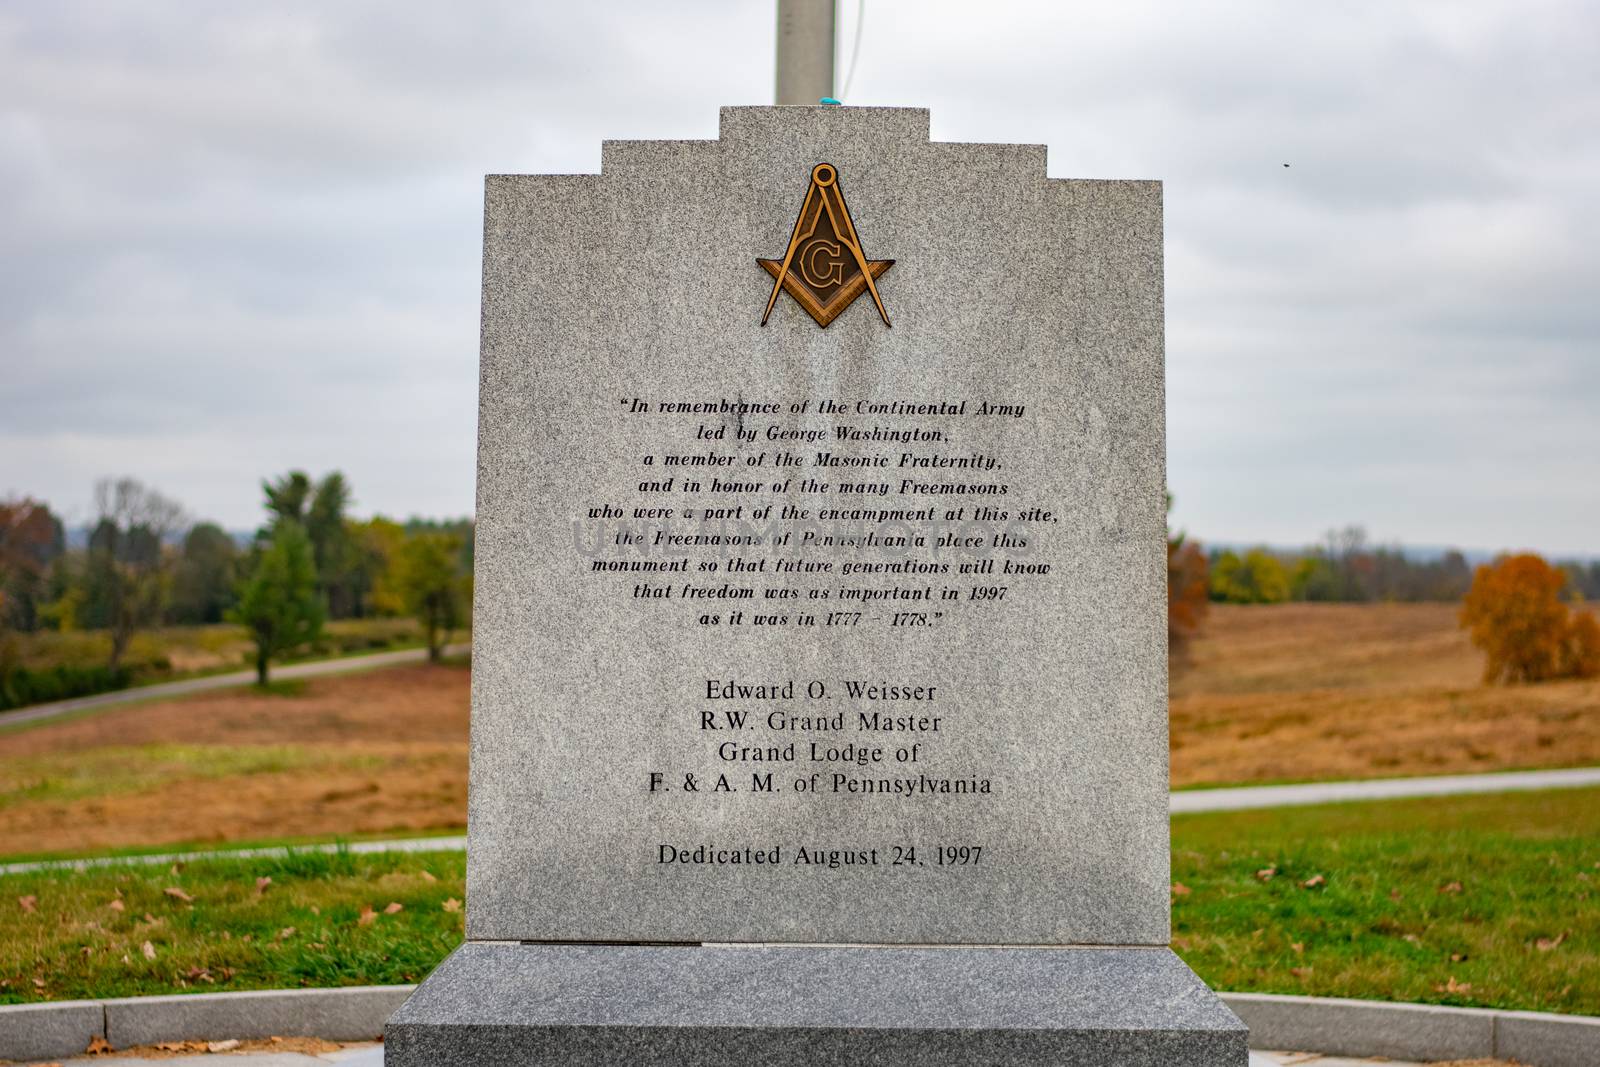 The Freemasons Monument at Valley Forge National Historical Park by bju12290